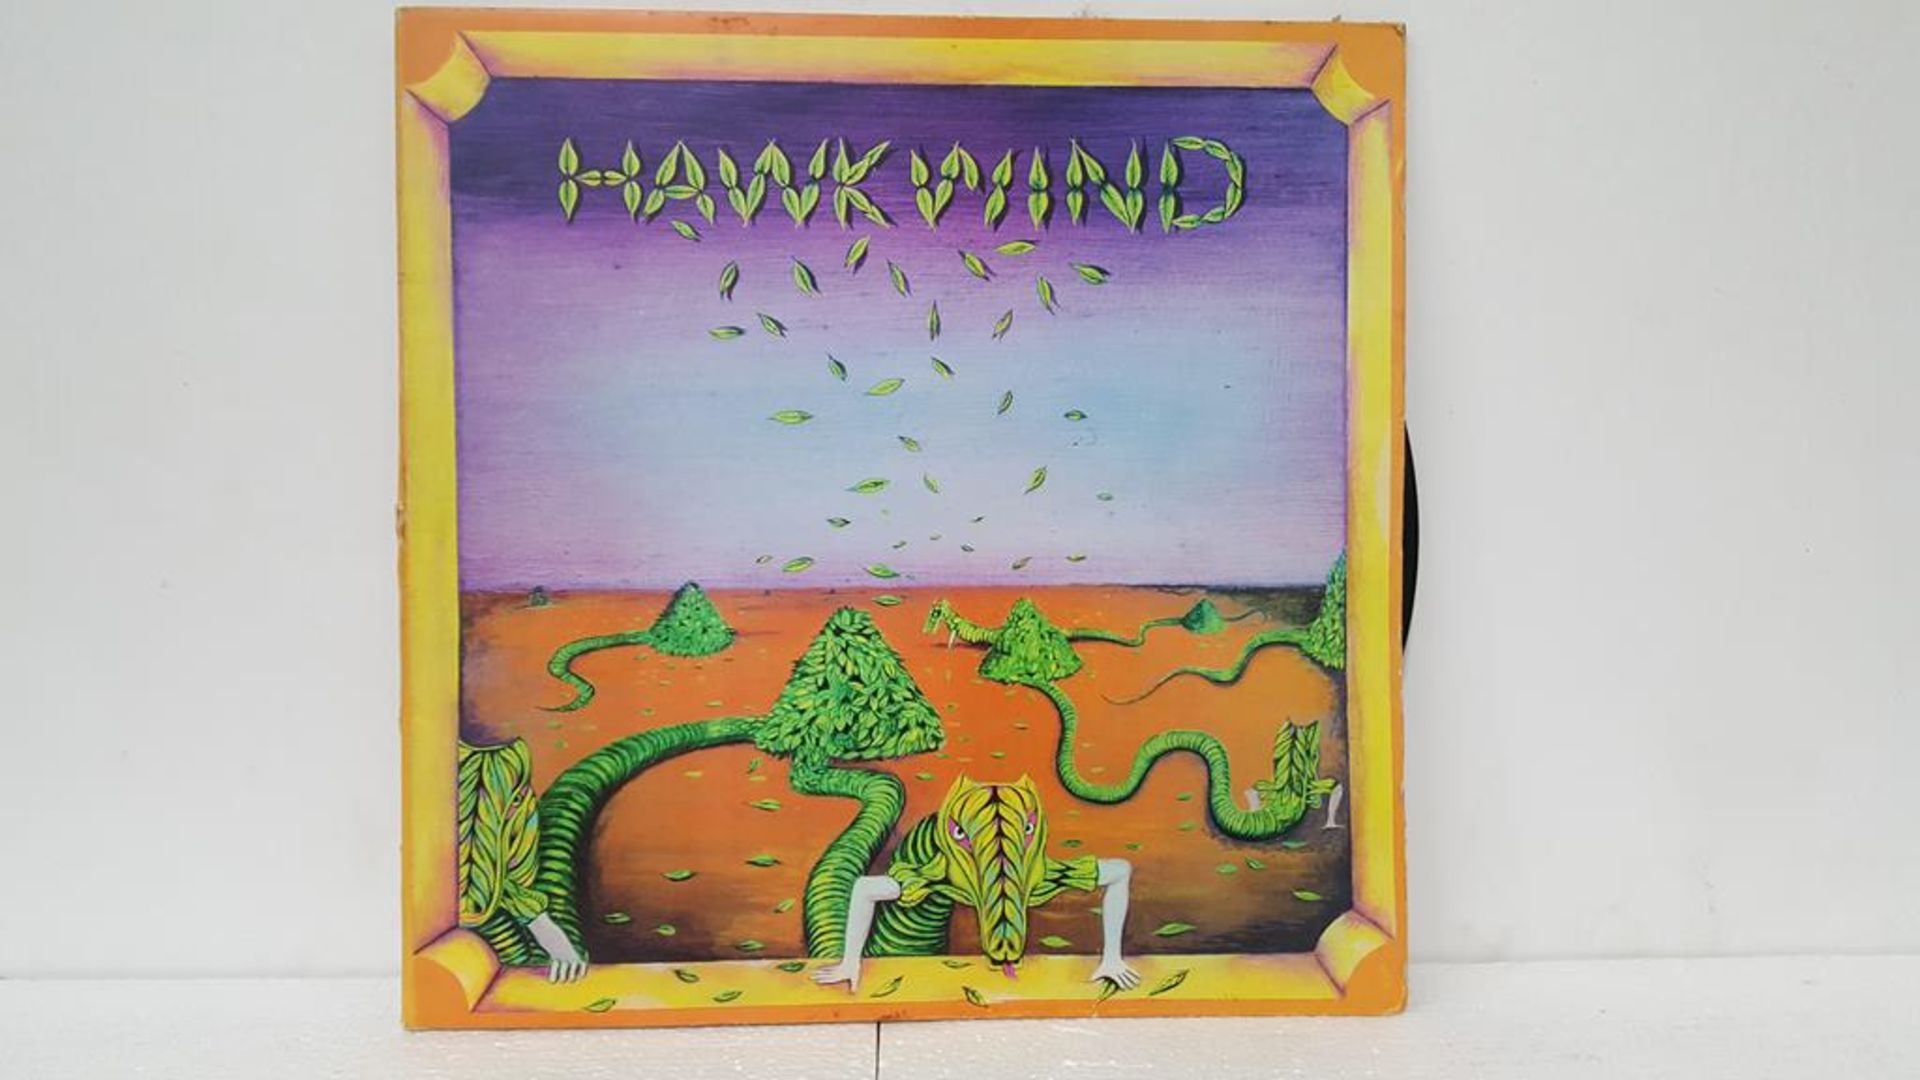 Hawkwind 'Warrior on the Edge of Time' and 'Hawkwind' LPs - Image 7 of 11